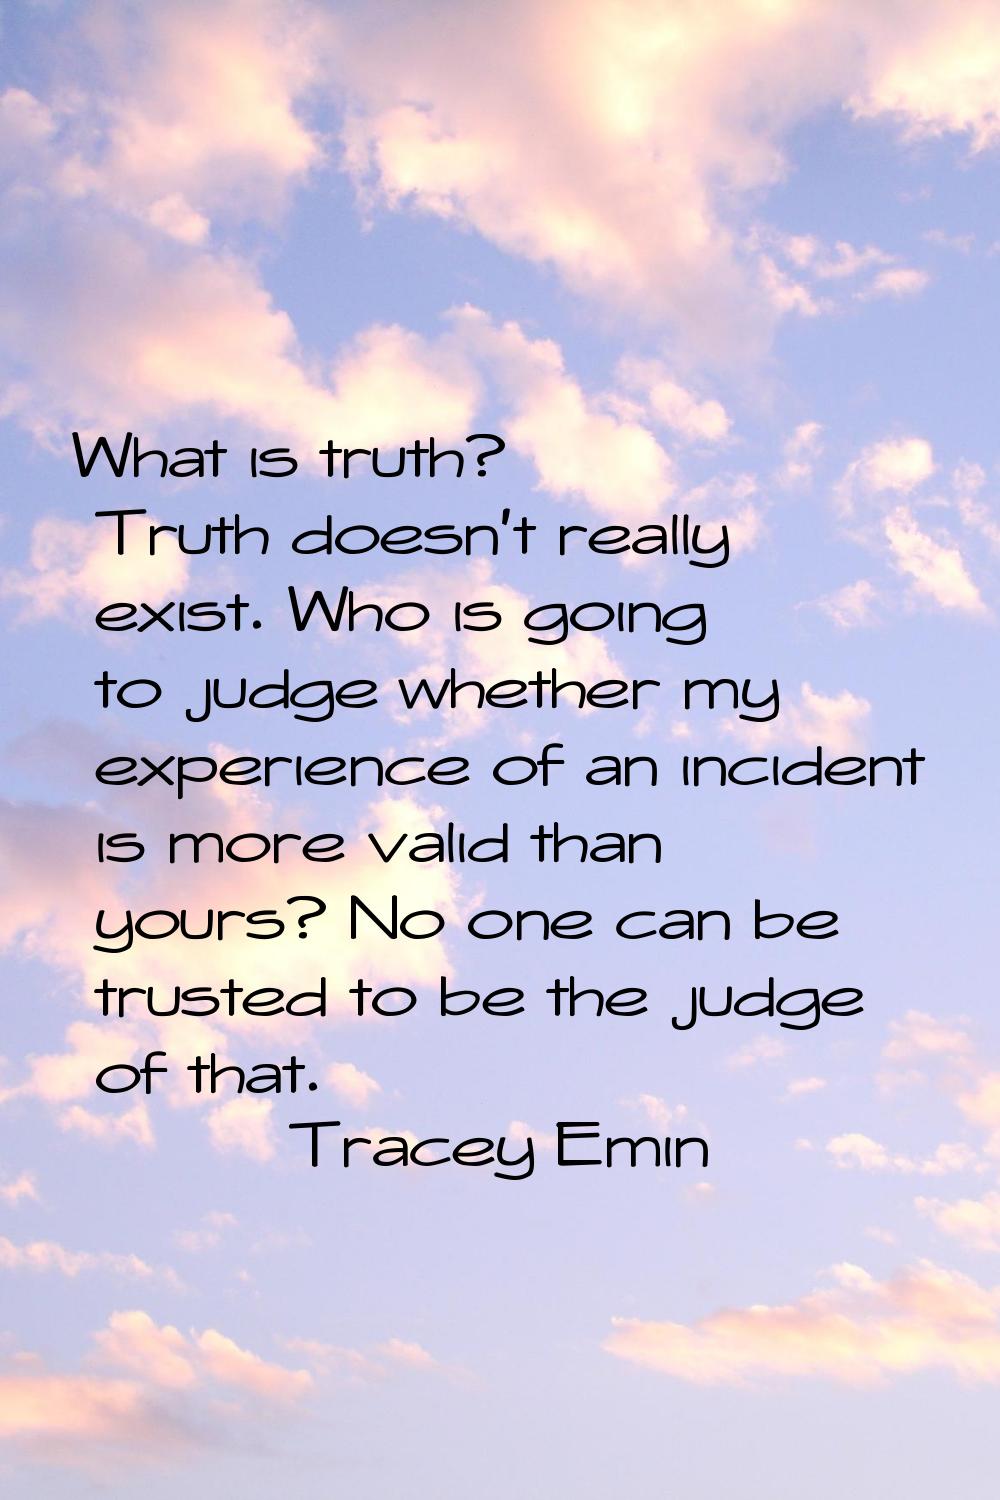 What is truth? Truth doesn't really exist. Who is going to judge whether my experience of an incide